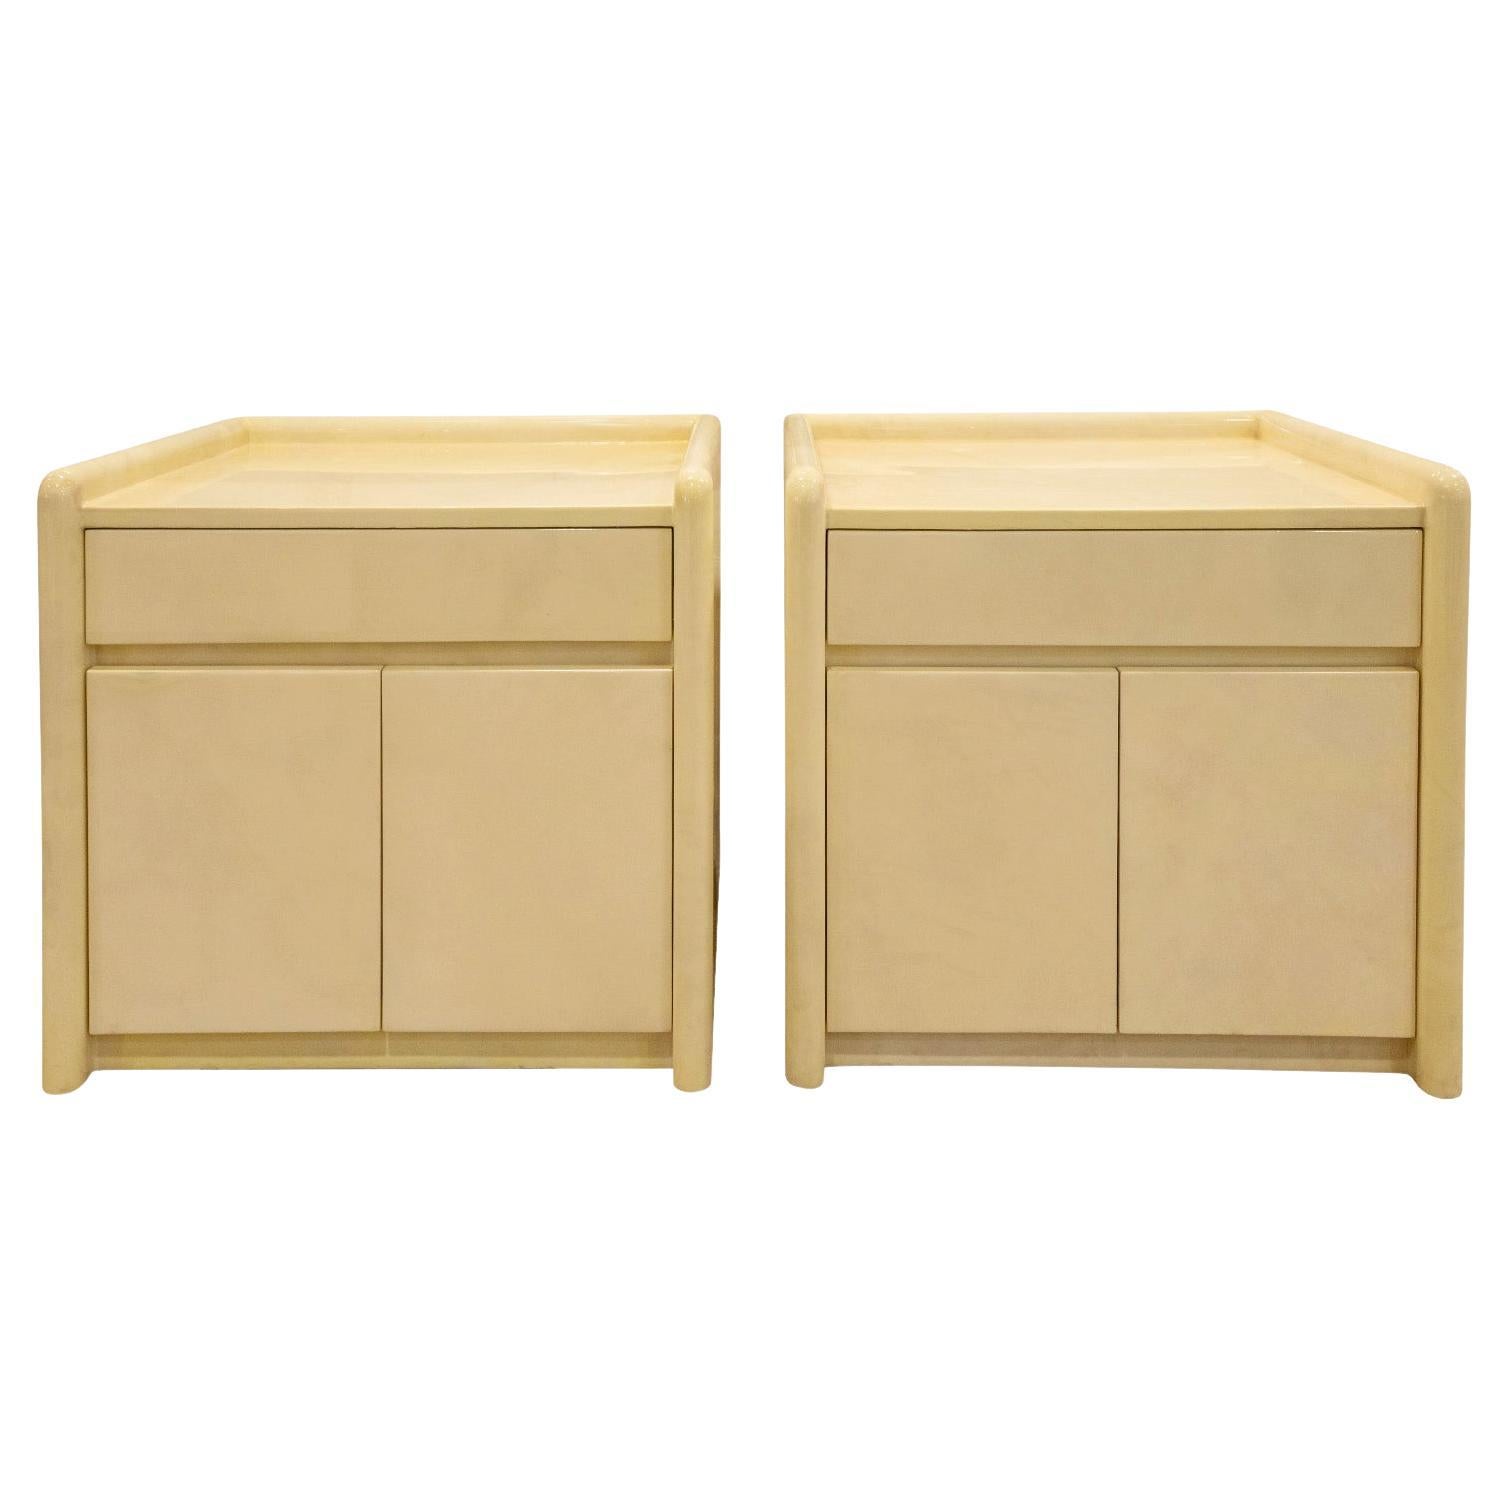 Karl Springer Rare & Exceptional Pair of Lacquered Goatskin Bedside Tables 1985